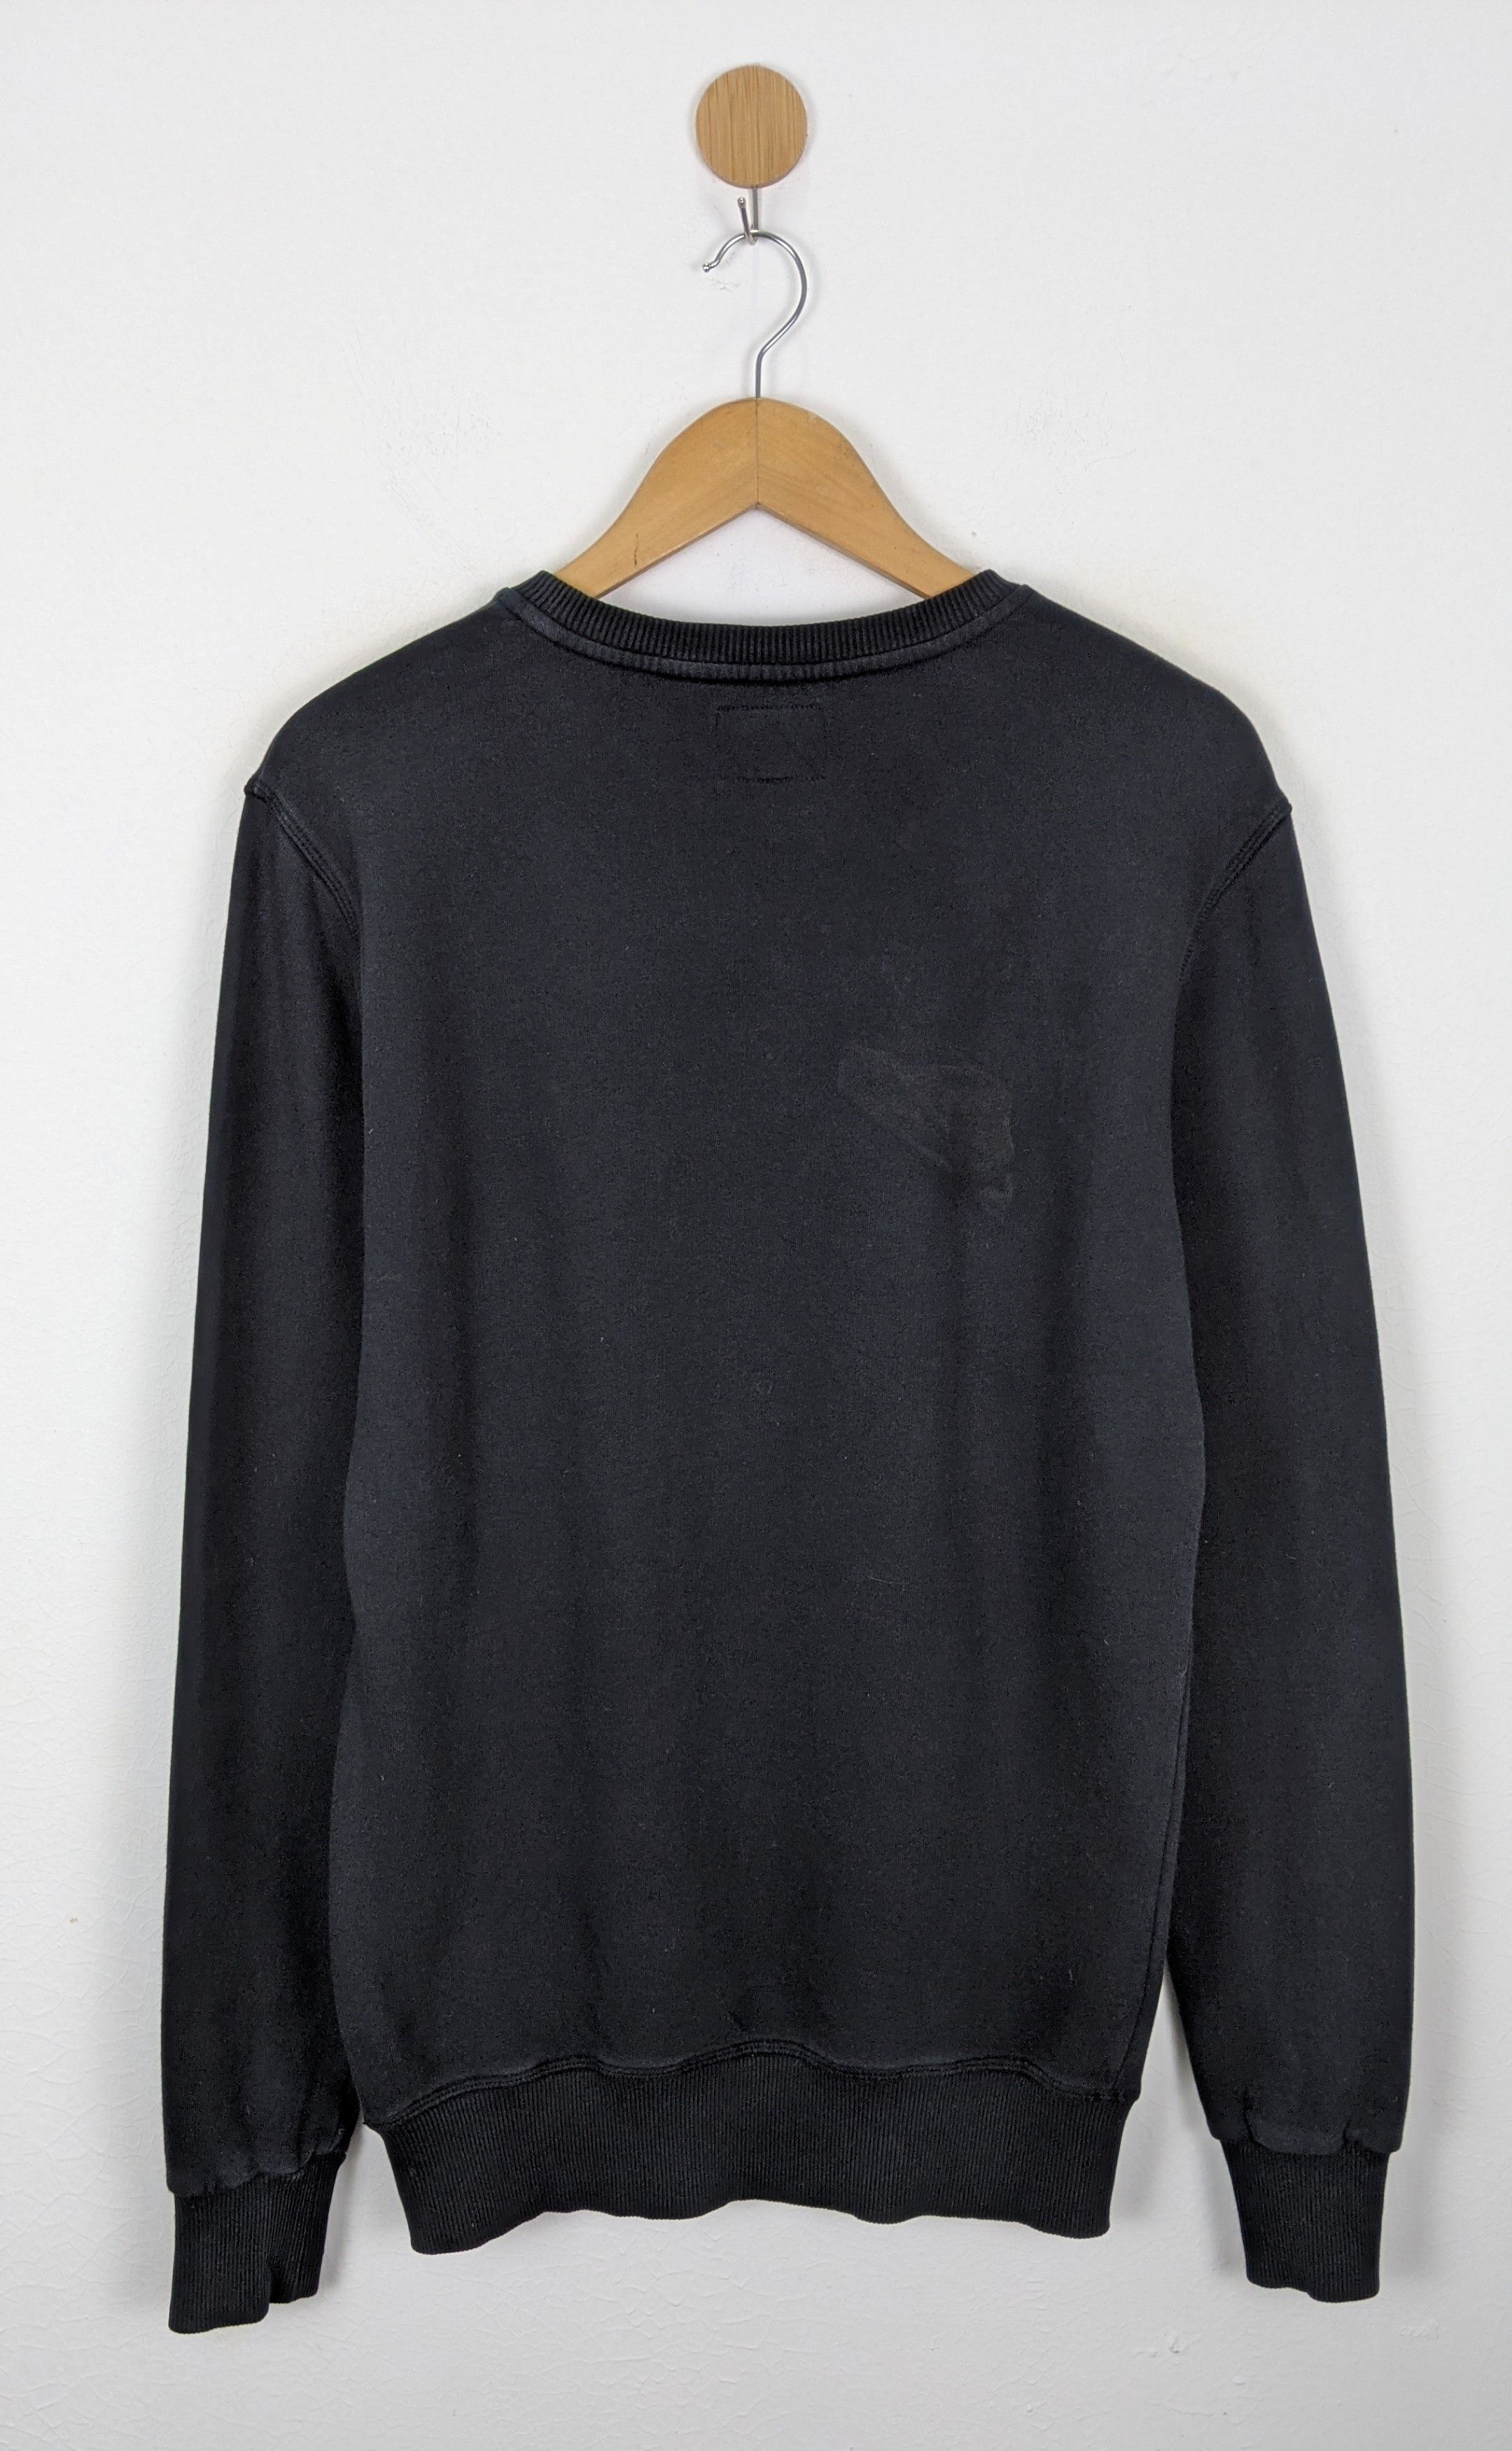 Vivienne Westwood Anglomania Expose Punk Rock Sex sweat - 3